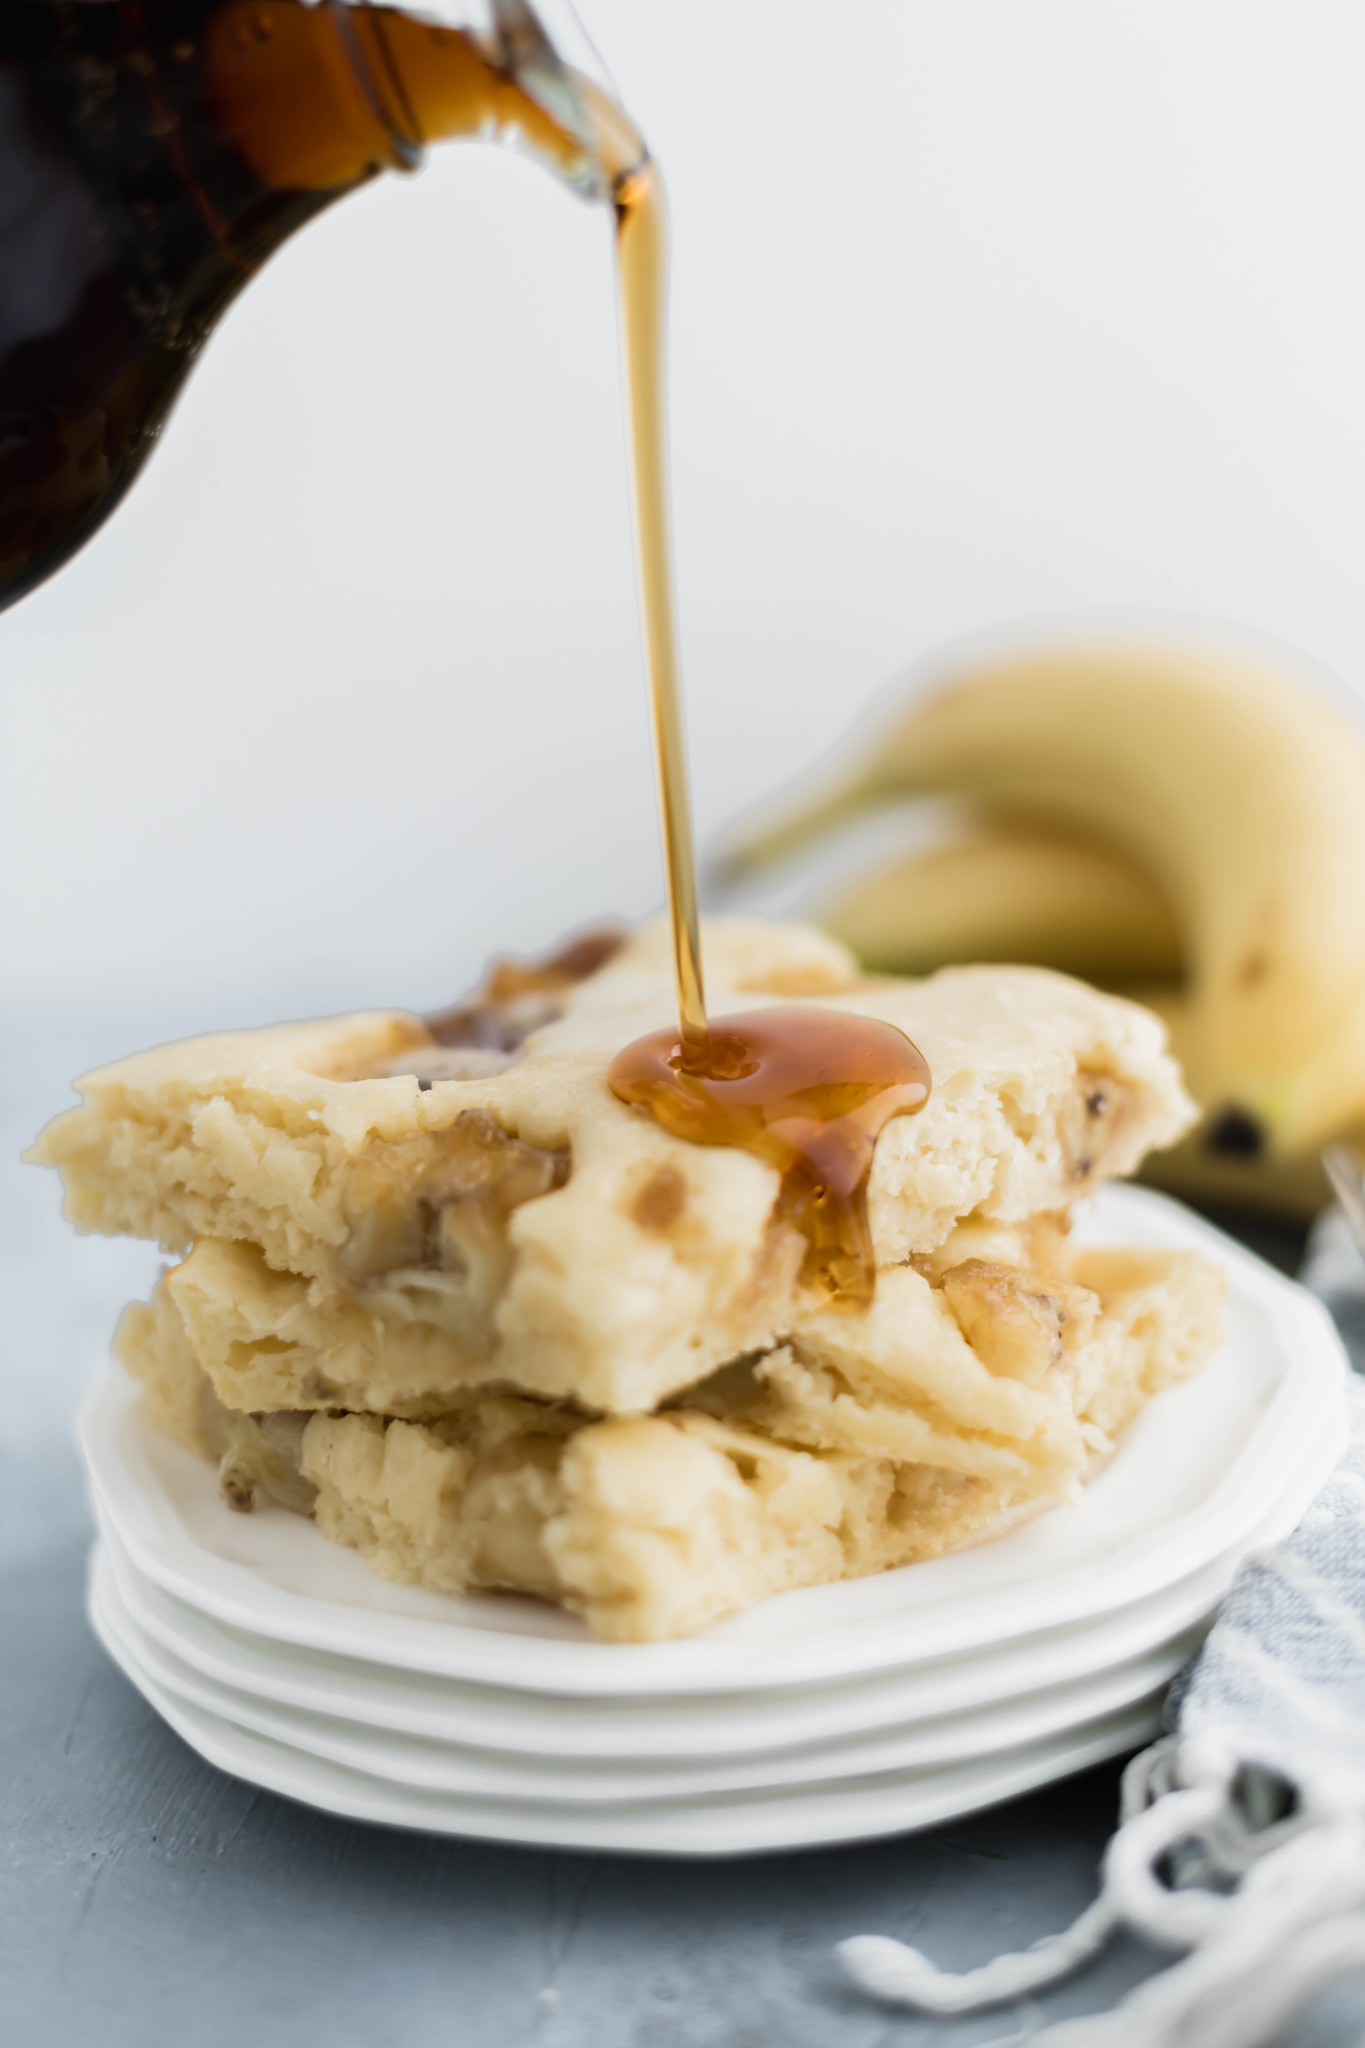 Get your pancakes made in a flash with this fun method. Sheet Pan Pancakes with Caramelized Bananas will quickly become a breakfast favorite. A perfect freezer friendly breakfast.